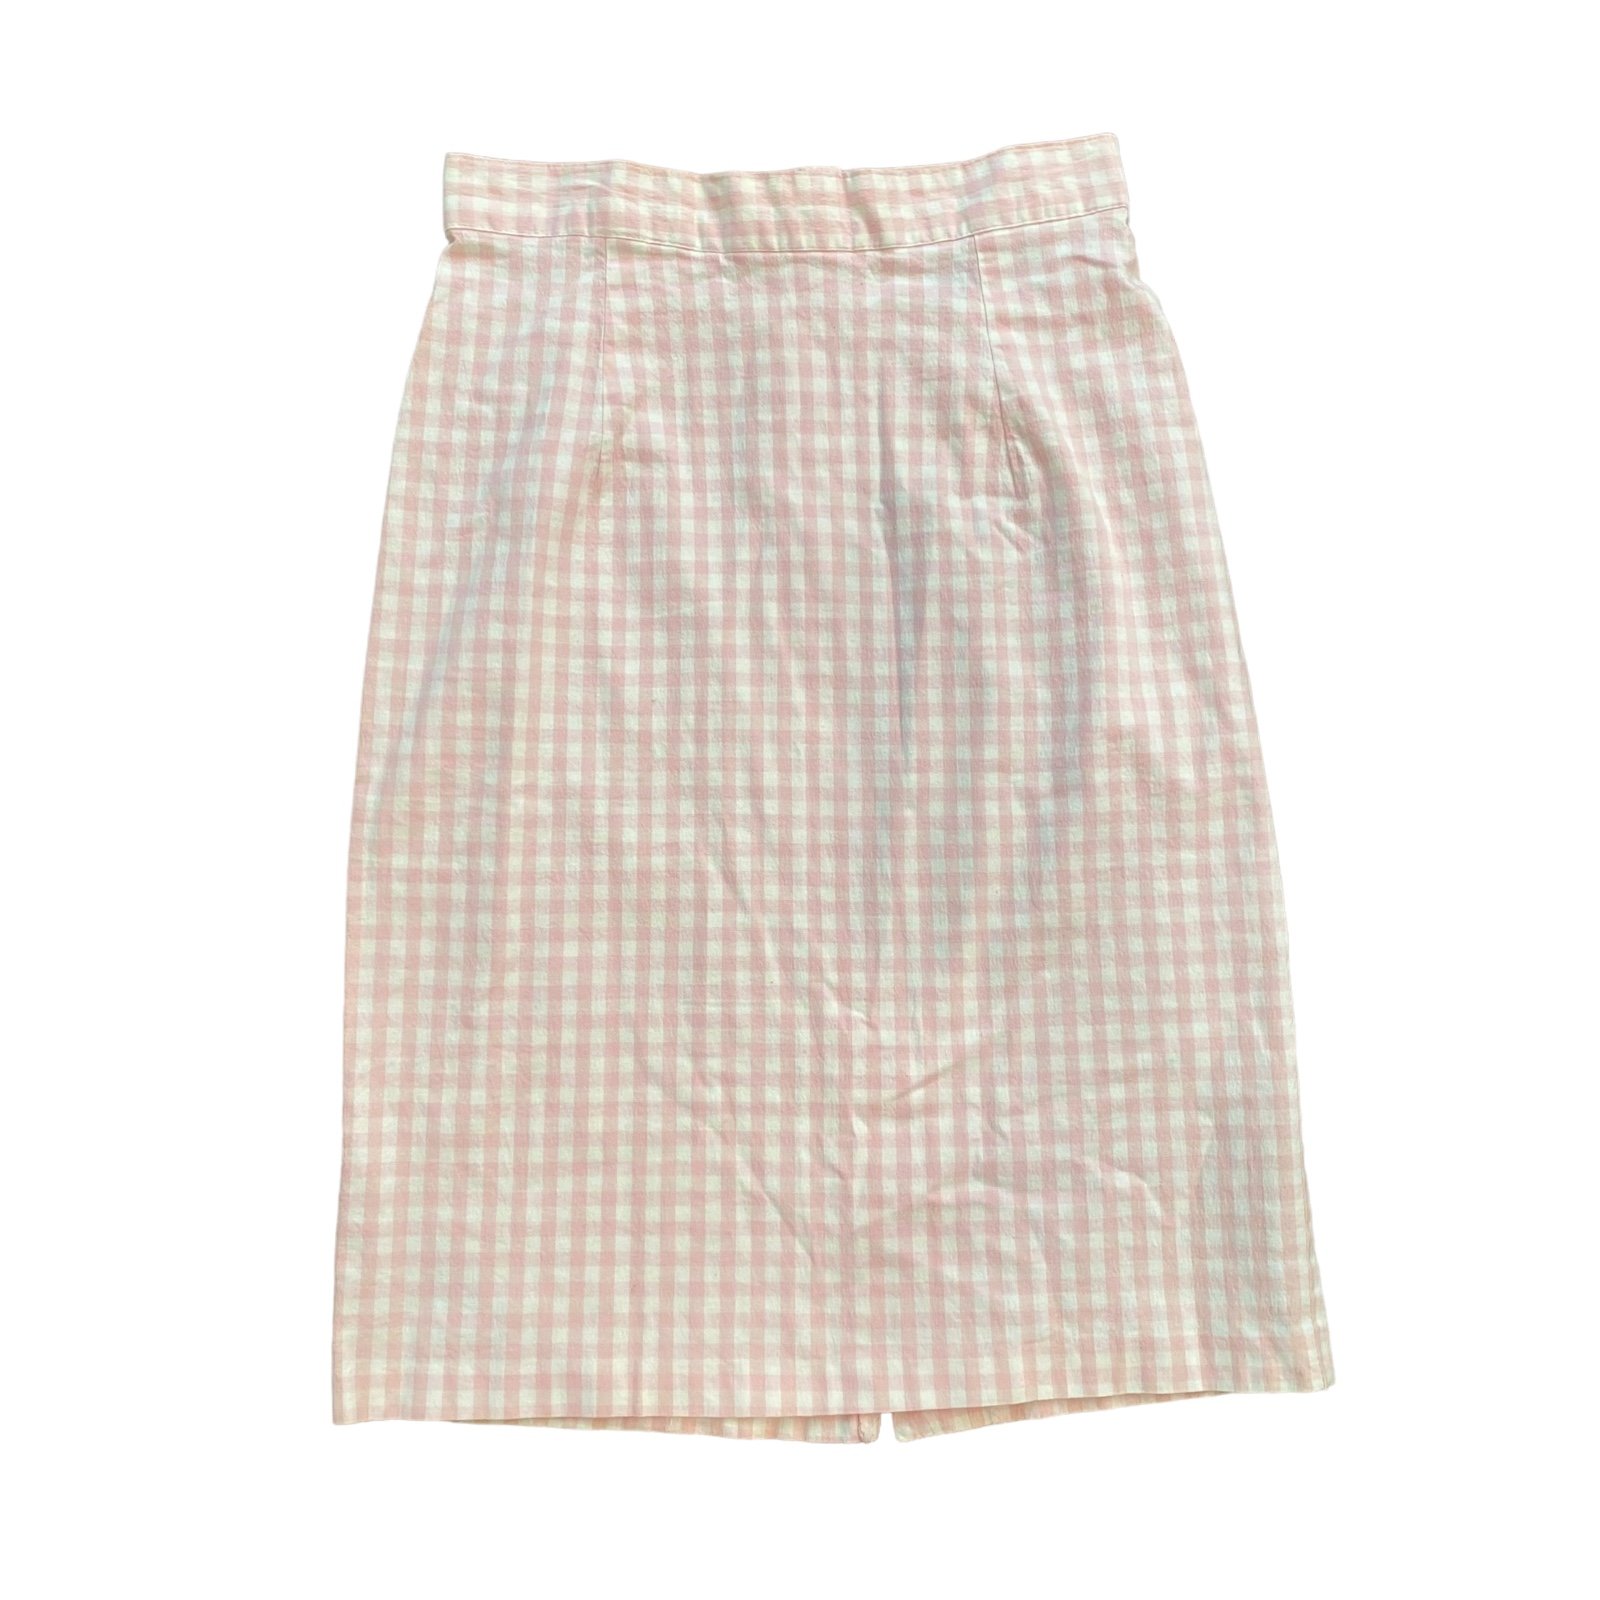 Gorgeous Vintage 90s Tracy Evans Pink Gingham Pencil Sk